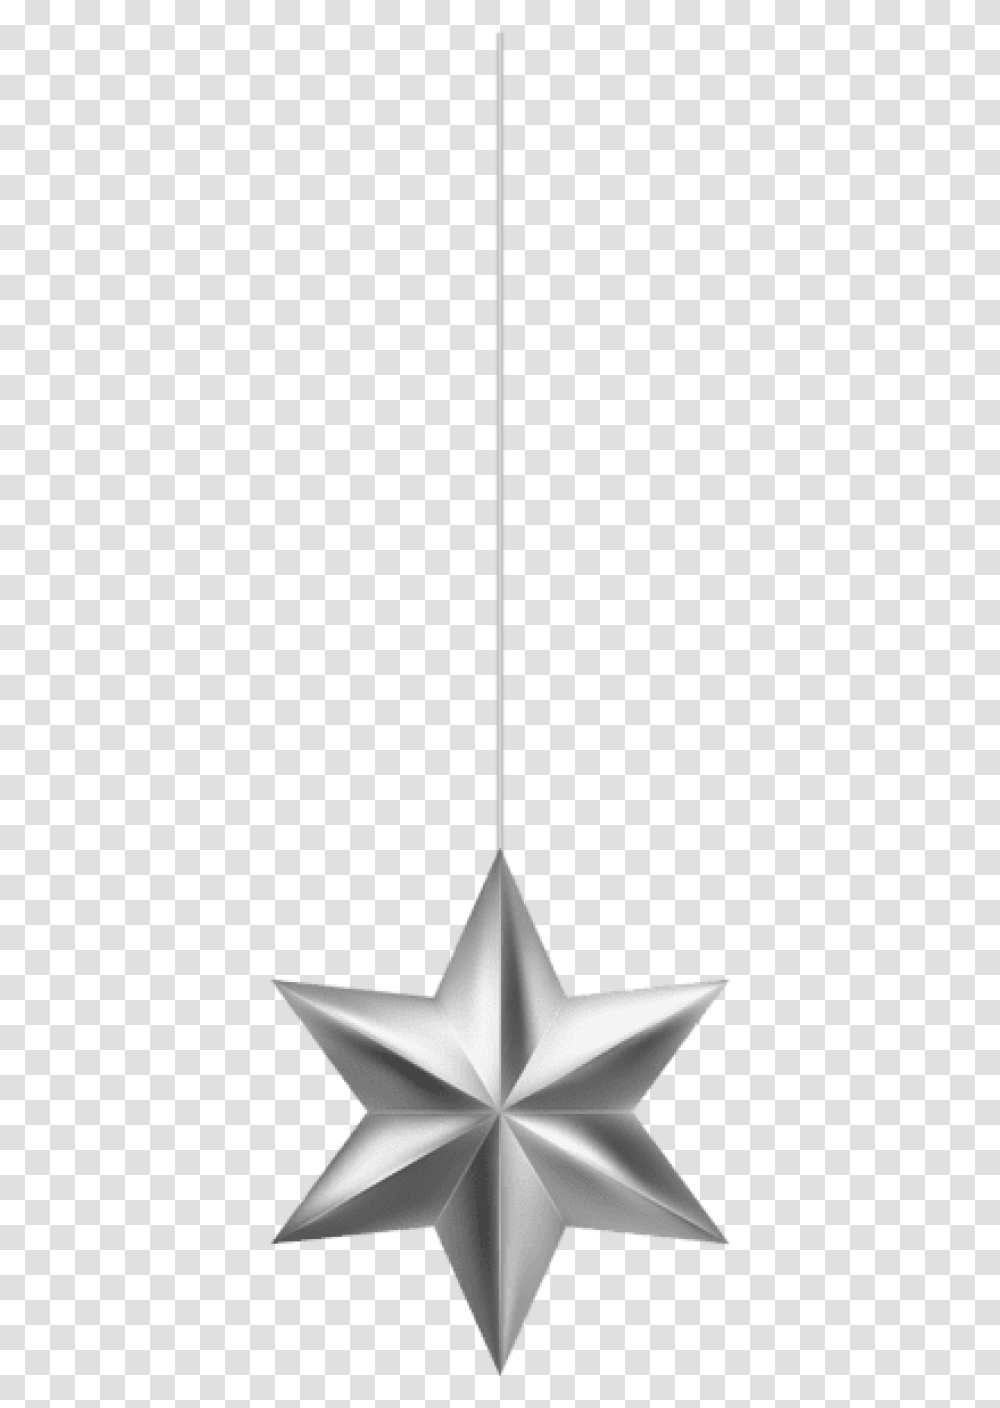 Free Silver Christmas Star Ornament Images Origami, Oars, Paddle, Silhouette Transparent Png